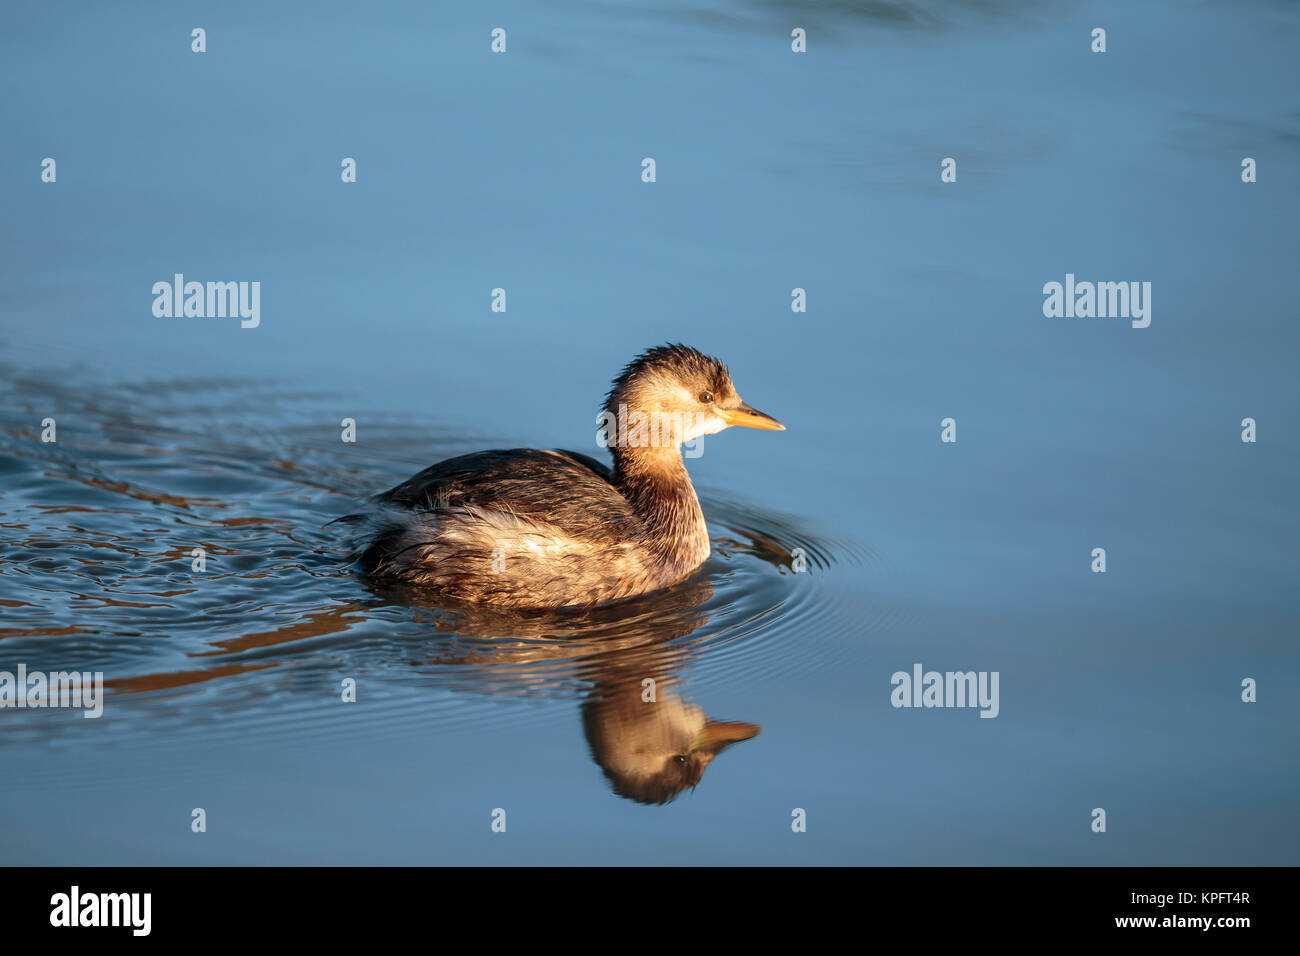 A Little Grebe on blue water Stock Photo